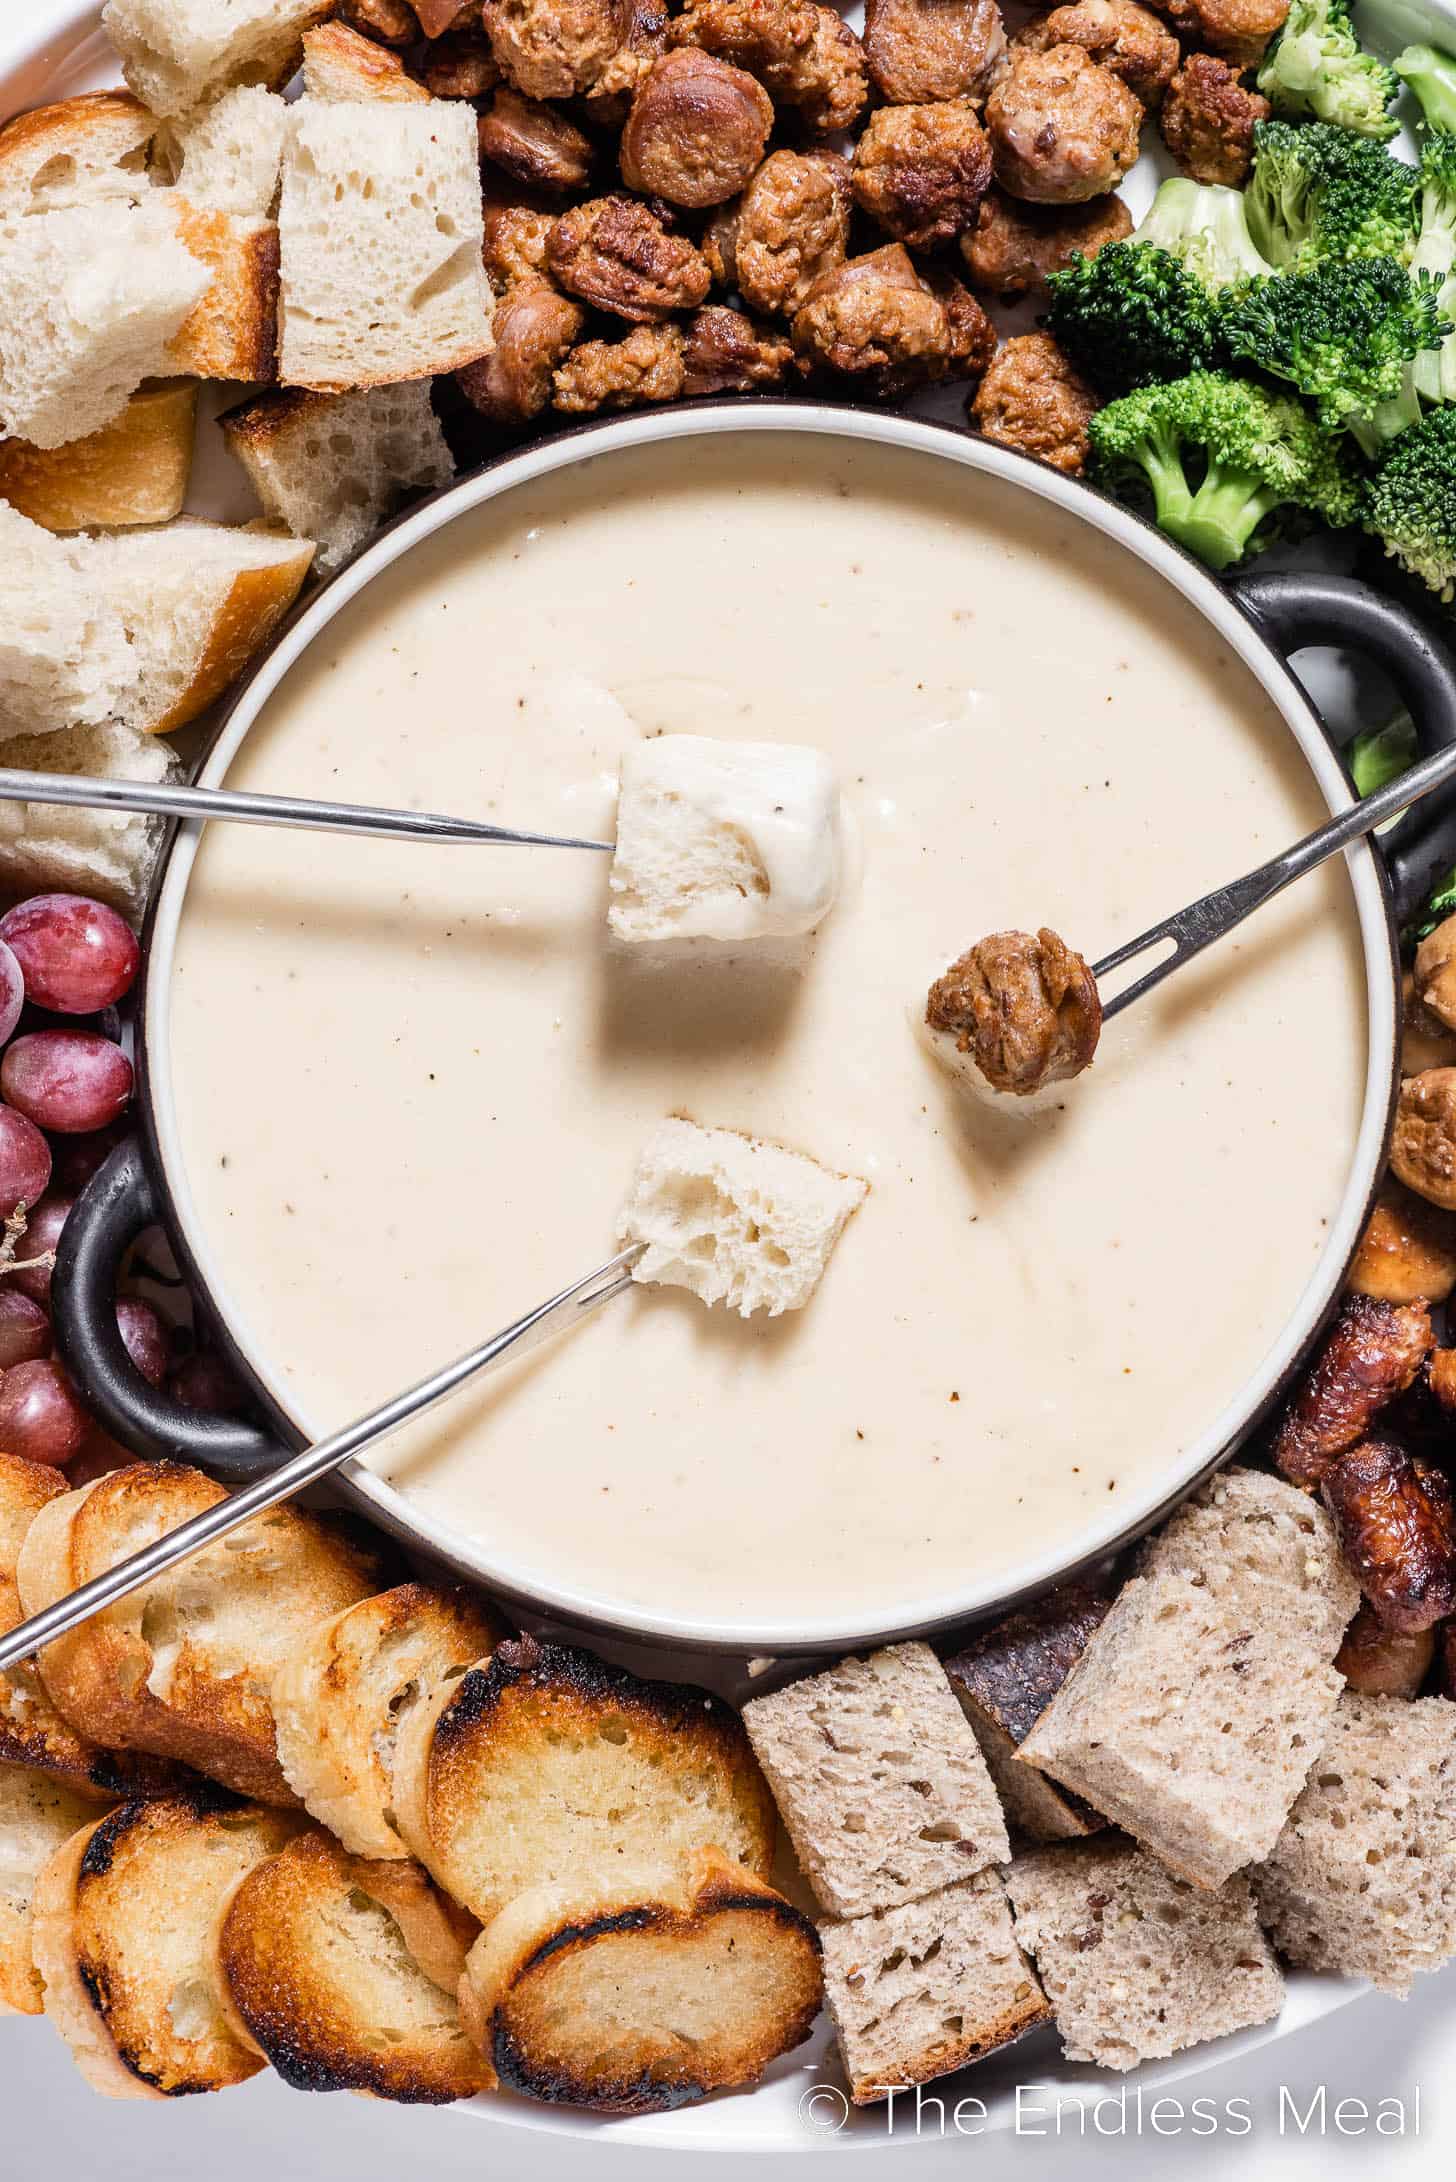 Gruyere Cheese Fondue with fondue forks dipping into it.